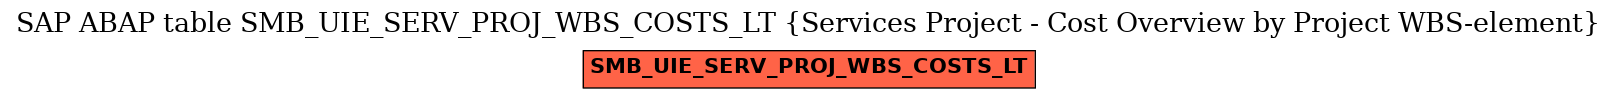 E-R Diagram for table SMB_UIE_SERV_PROJ_WBS_COSTS_LT (Services Project - Cost Overview by Project WBS-element)